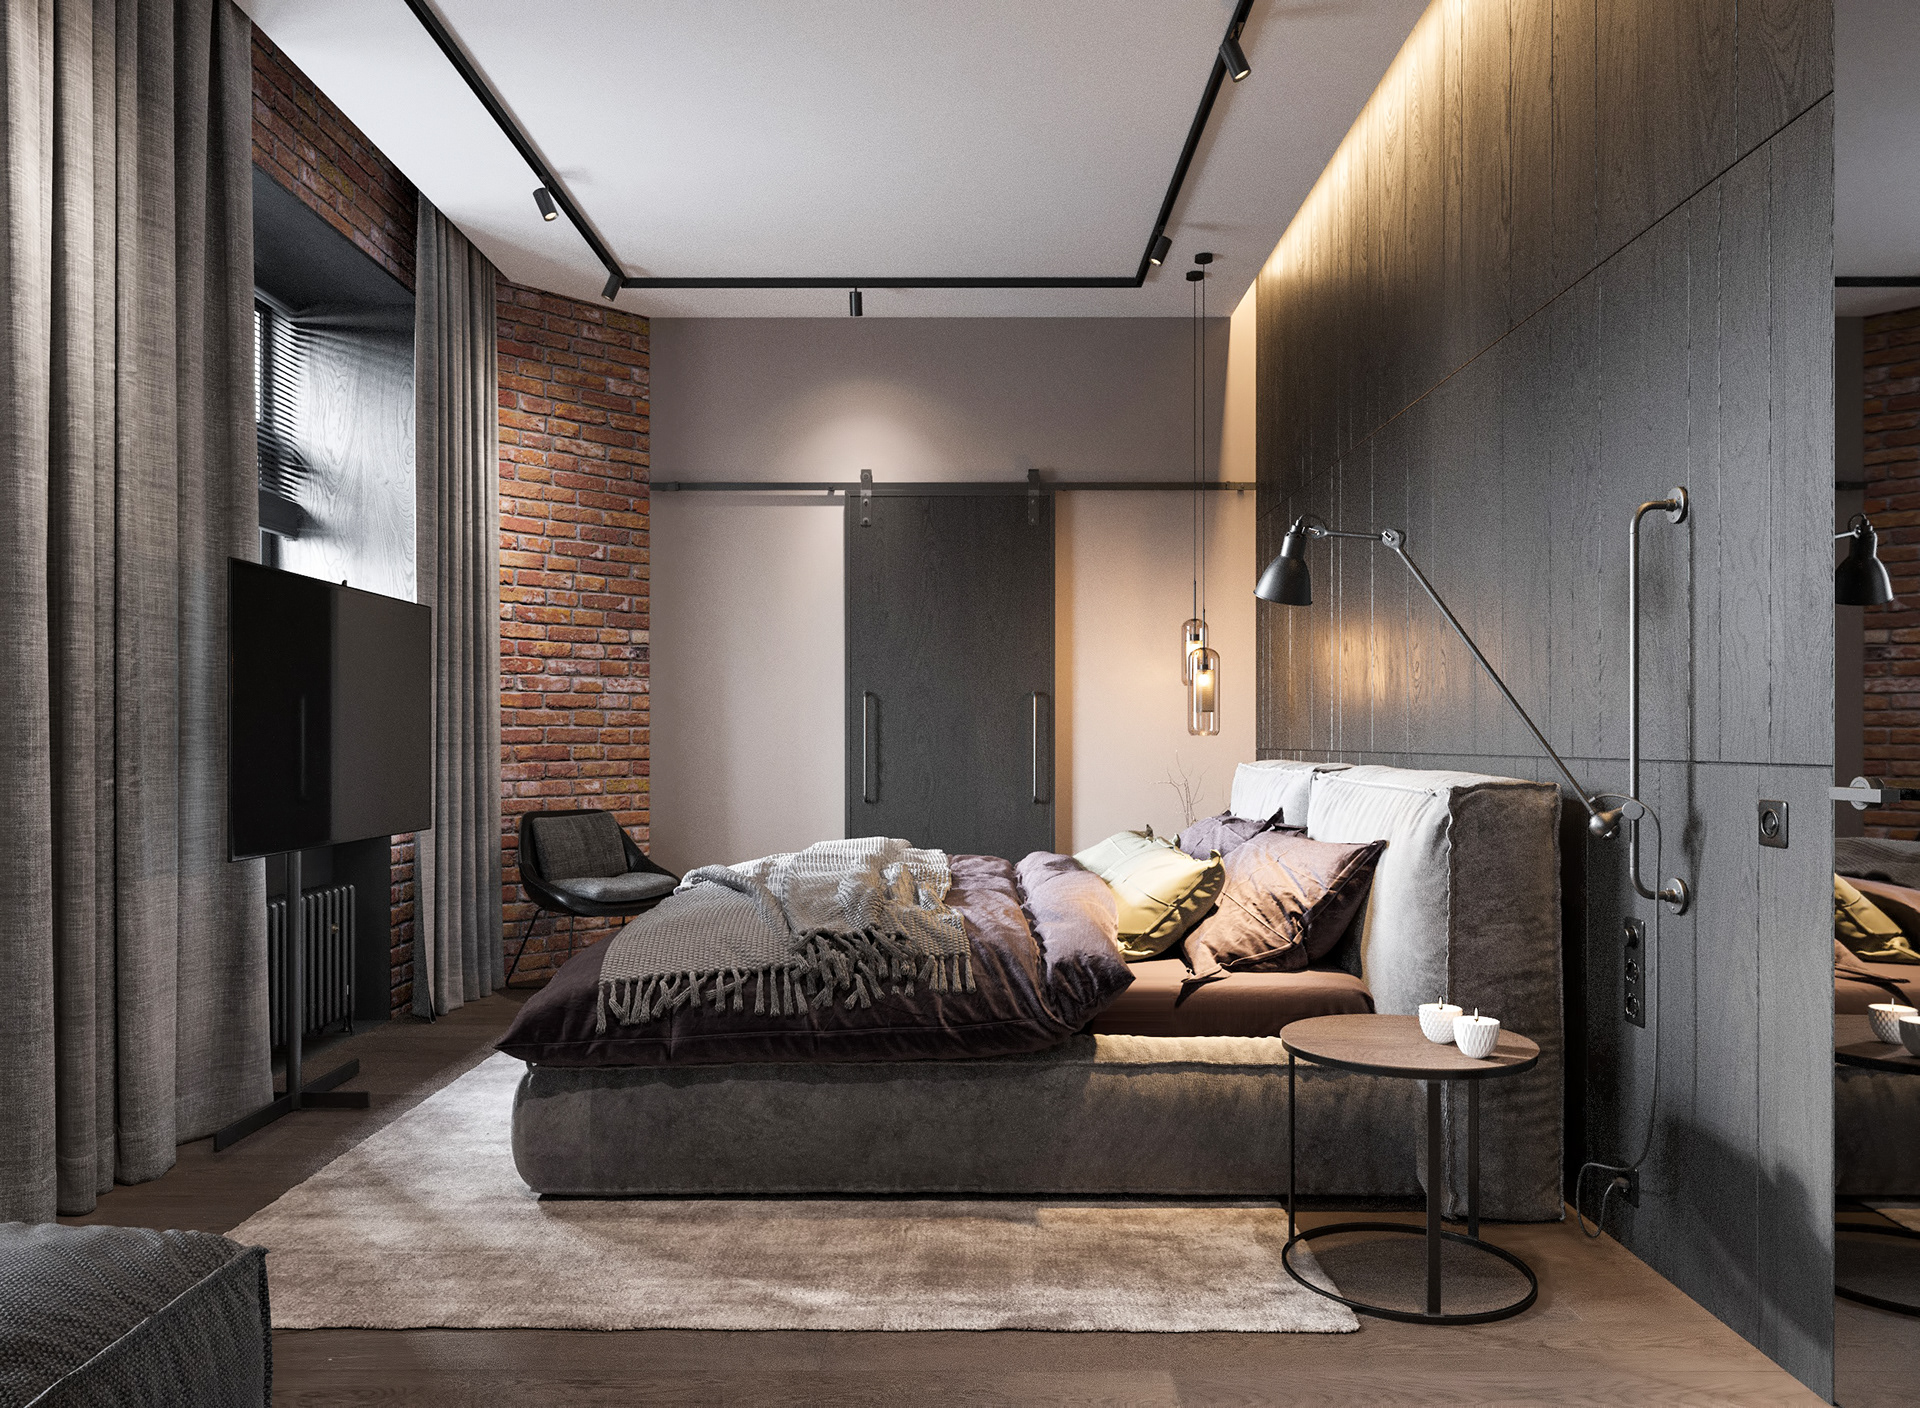  bedroom in contemporary style with loft elements.